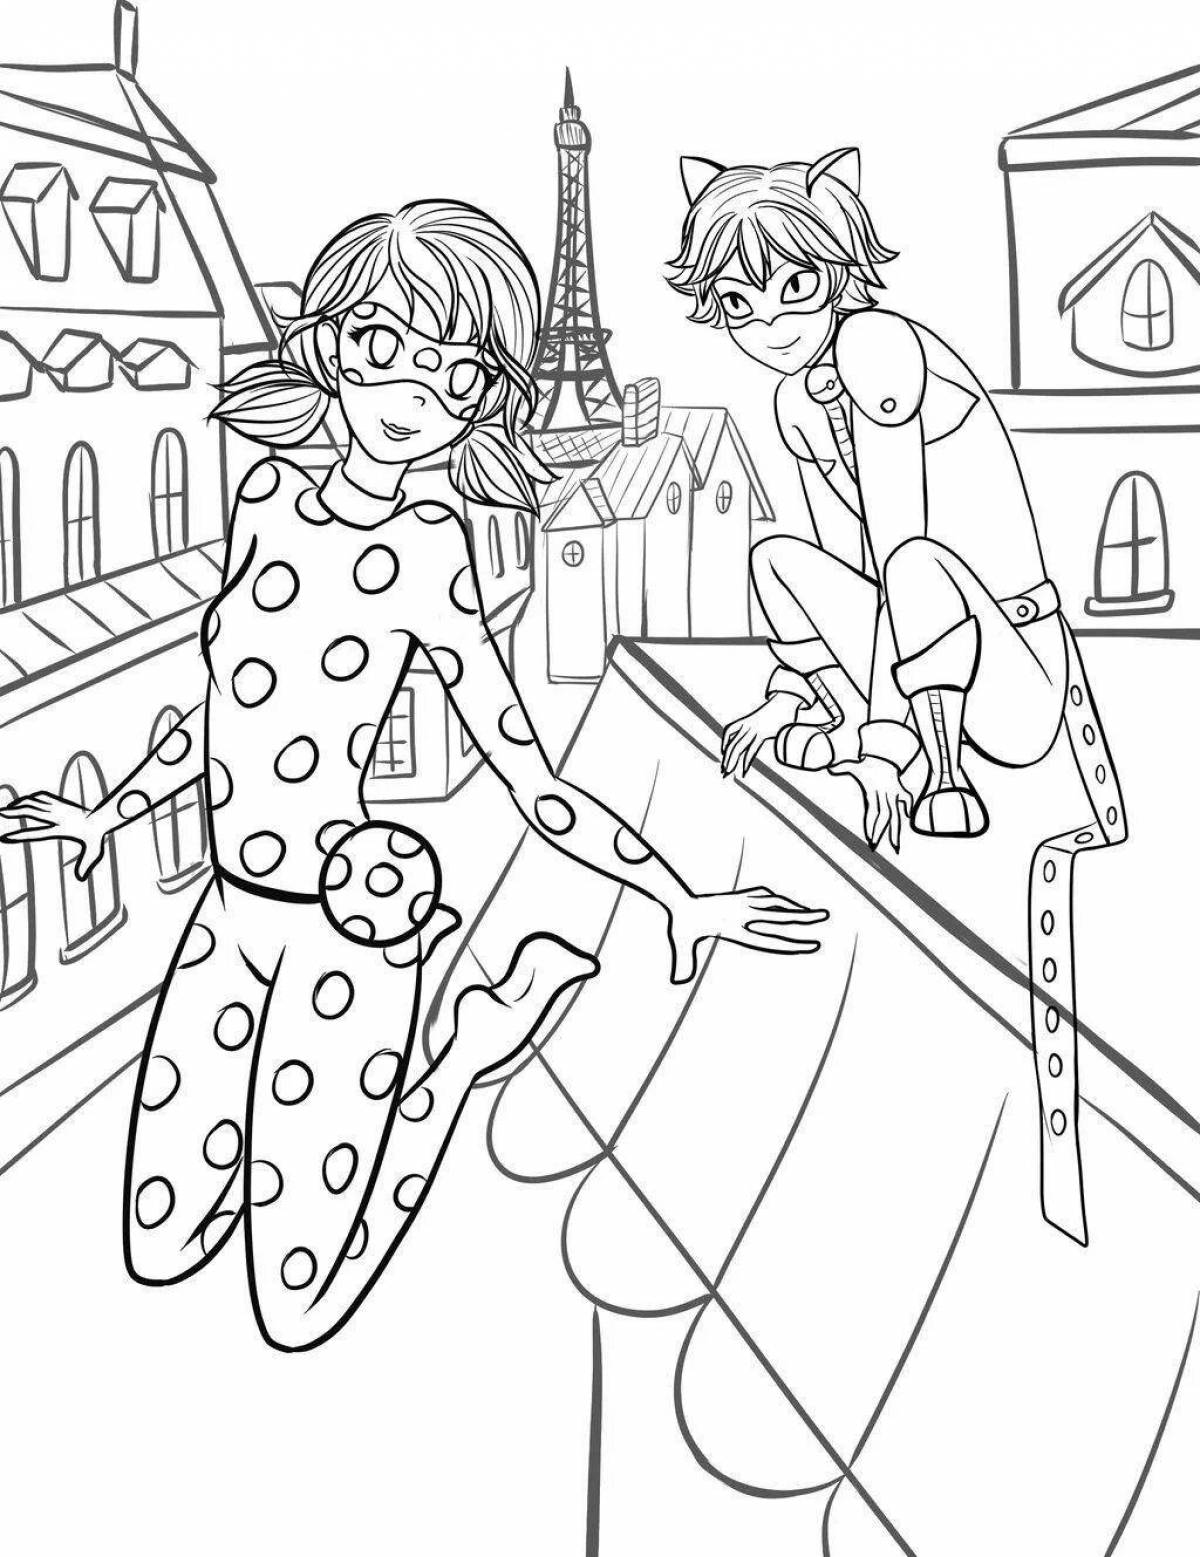 Fancy cat and ladybug coloring book